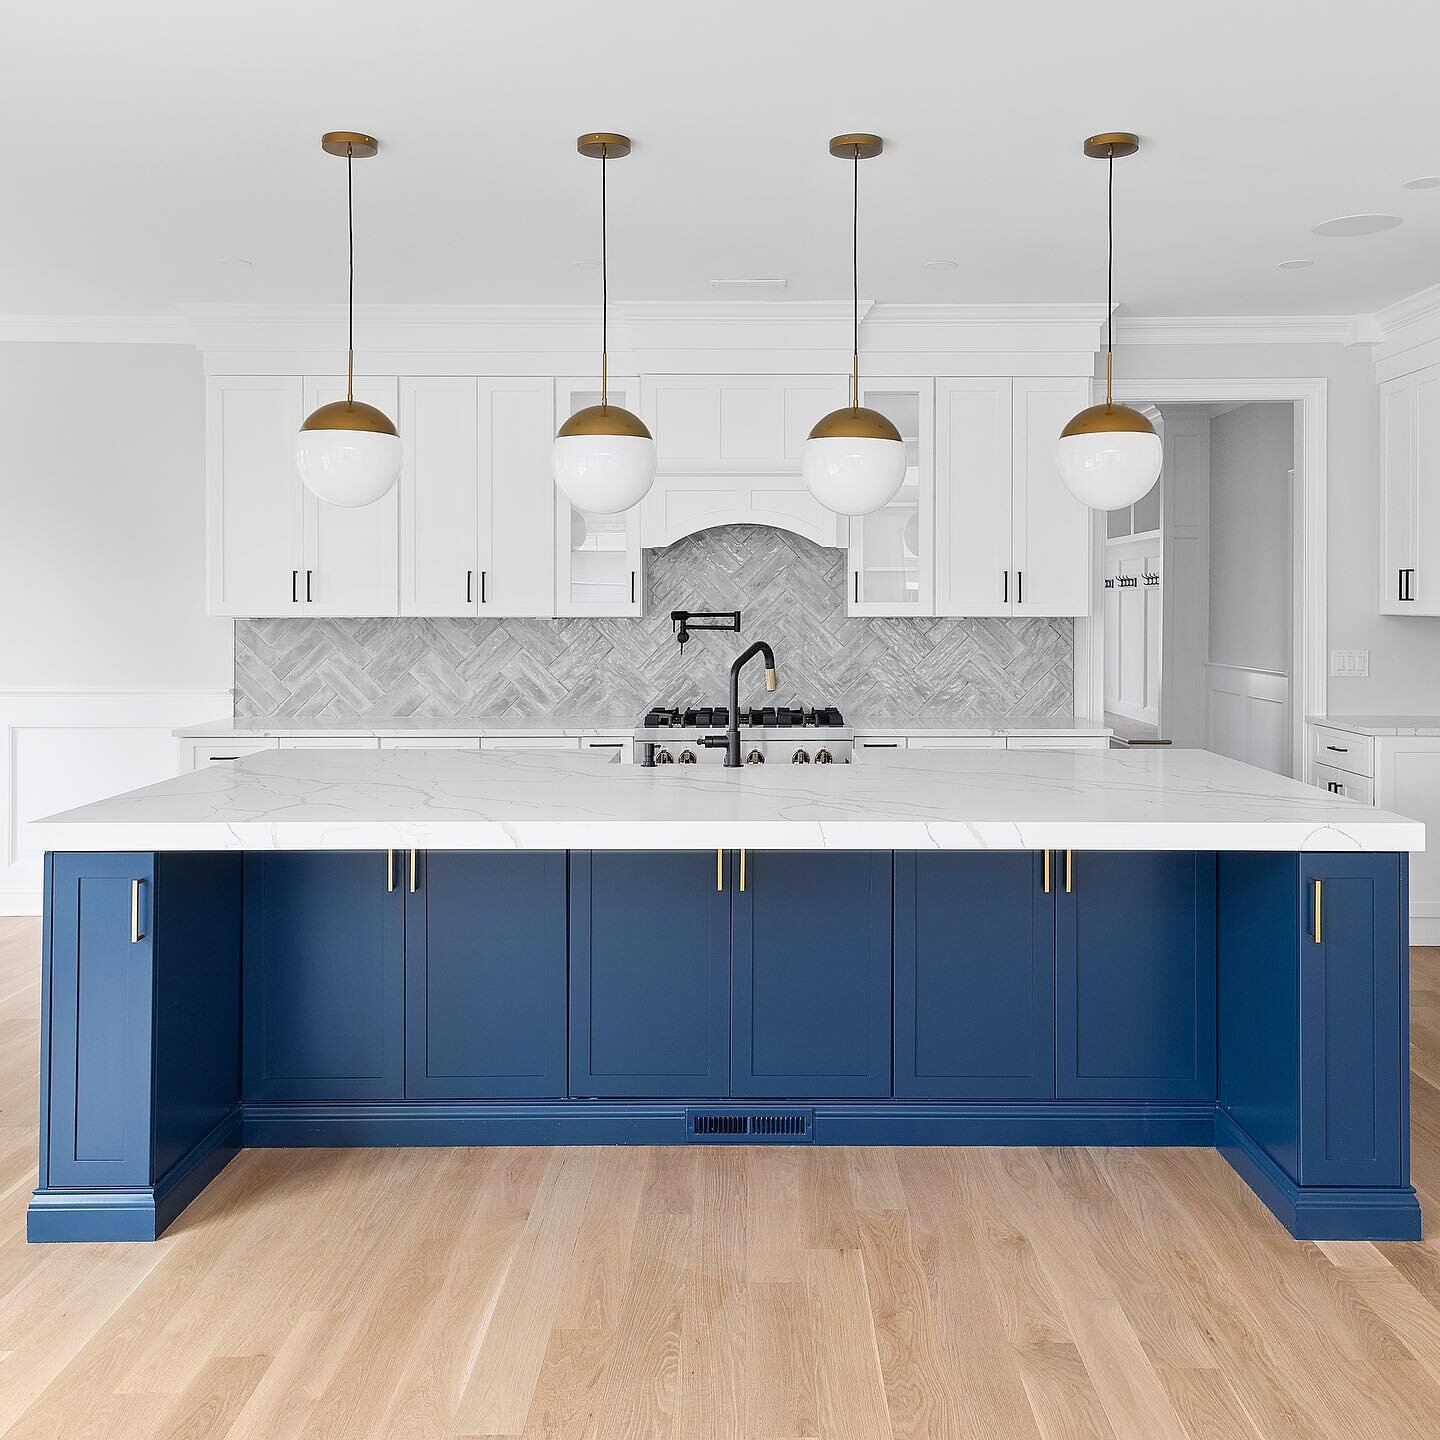 Blue and gold details in this kitchen by @rwbhomes